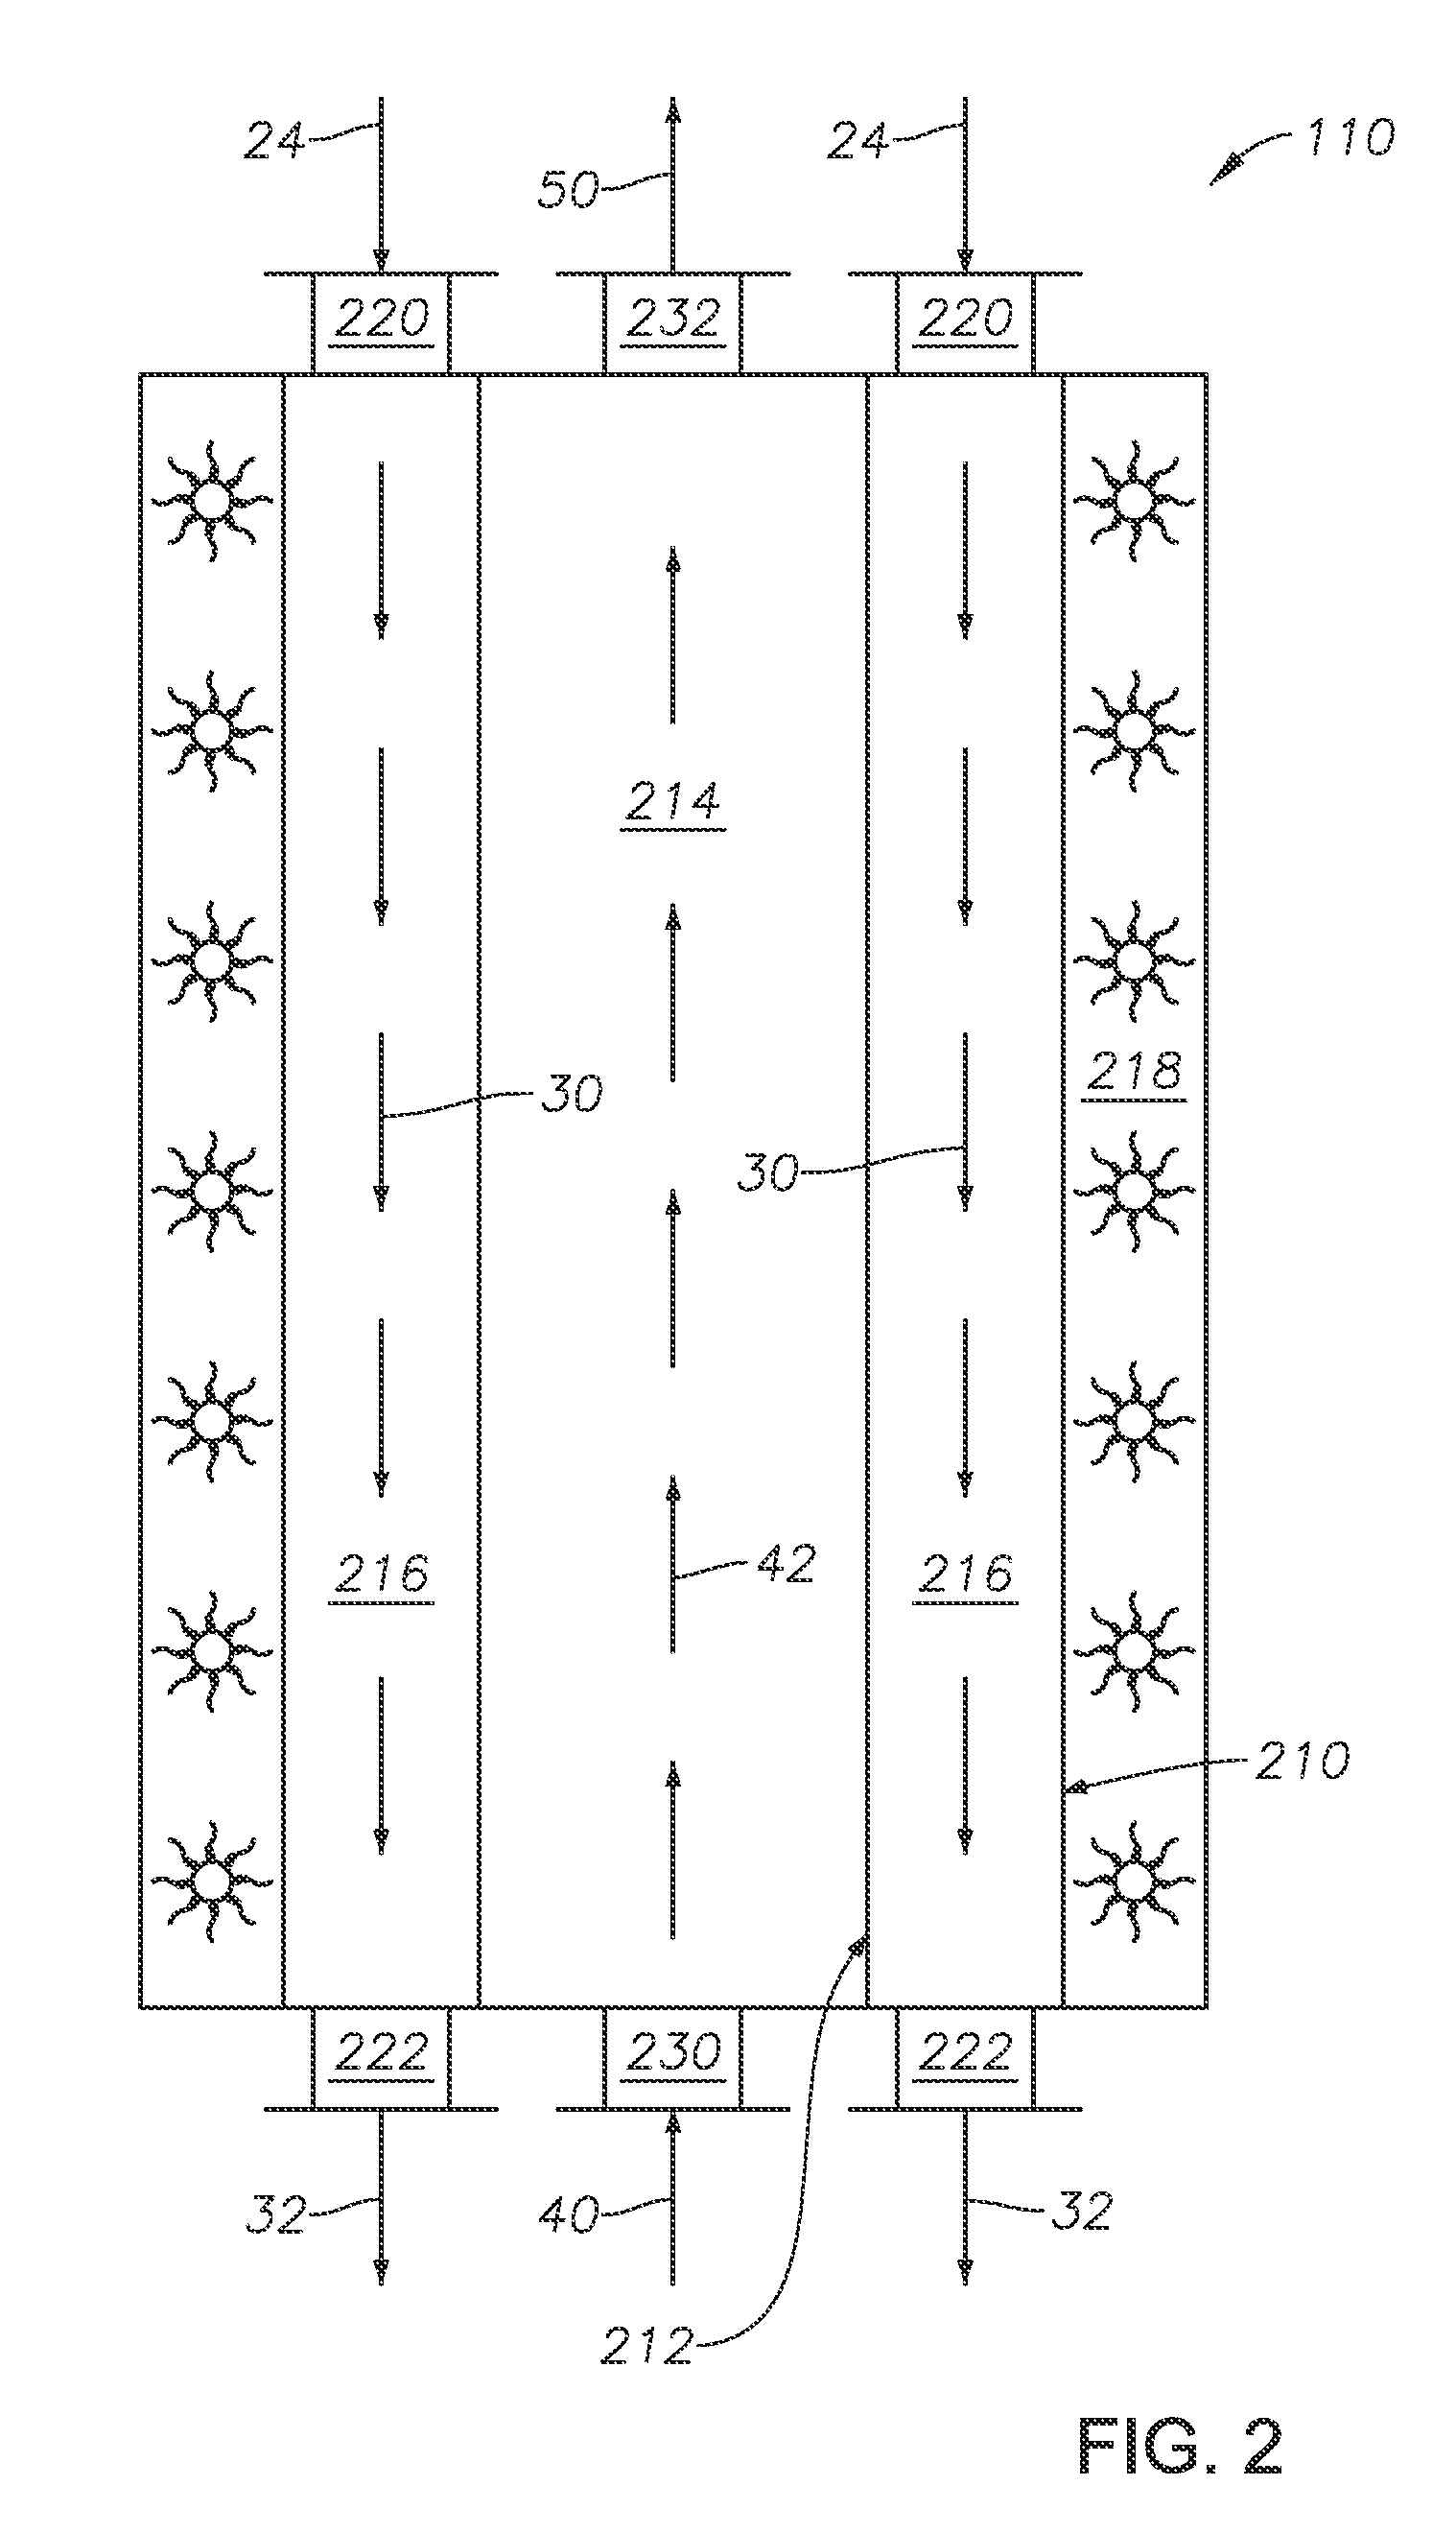 Process for heavy oil upgrading in a double-wall reactor